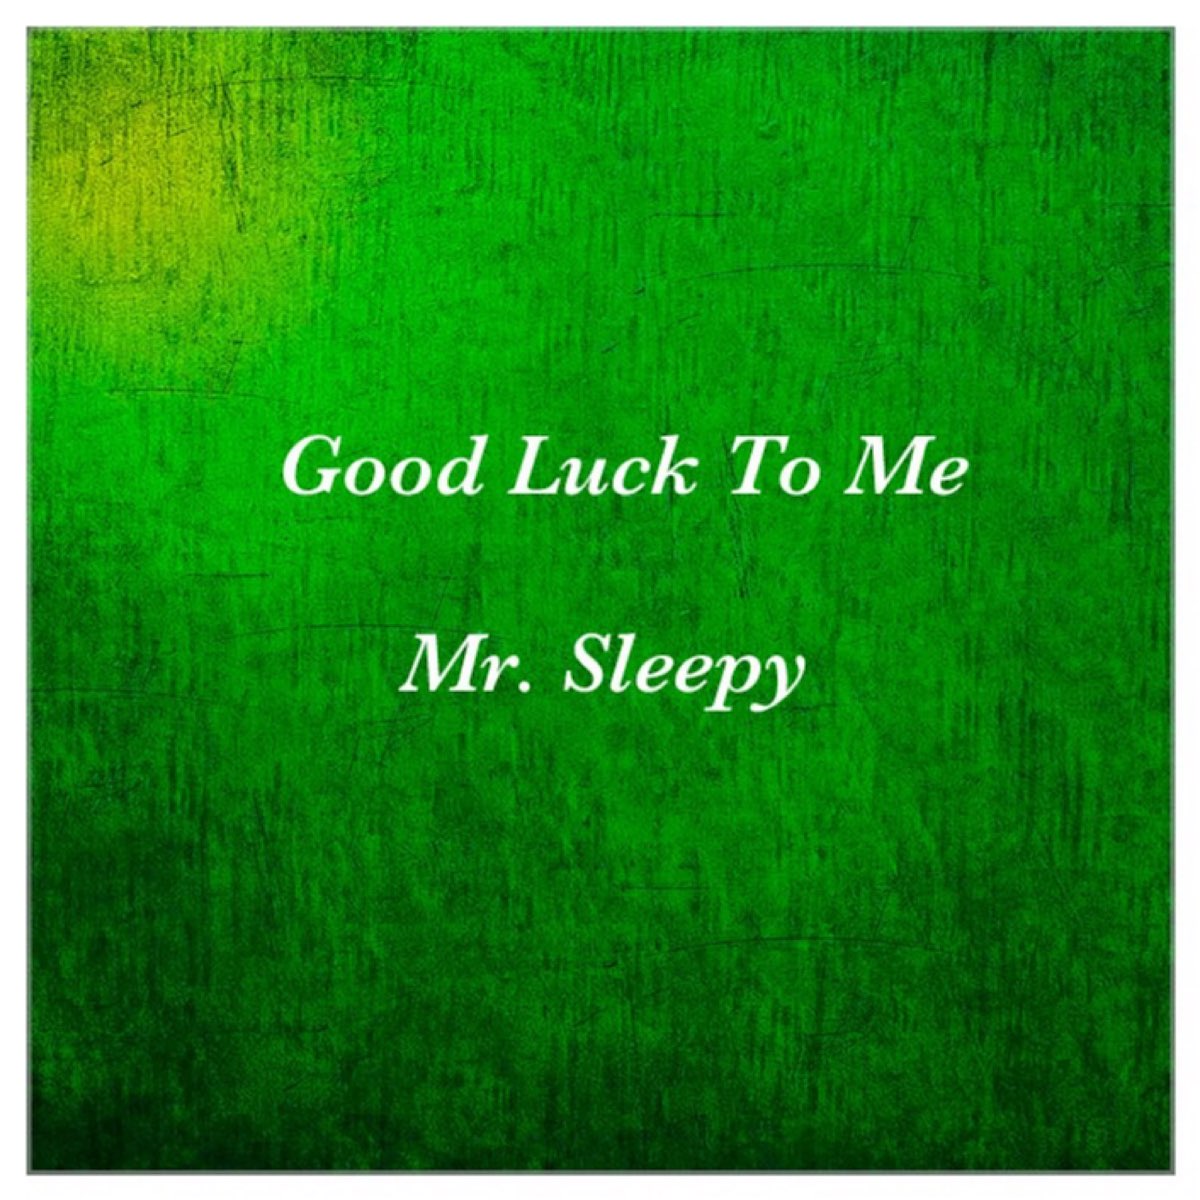 Good Luck To Me by Mr. Sleepy on Apple Music